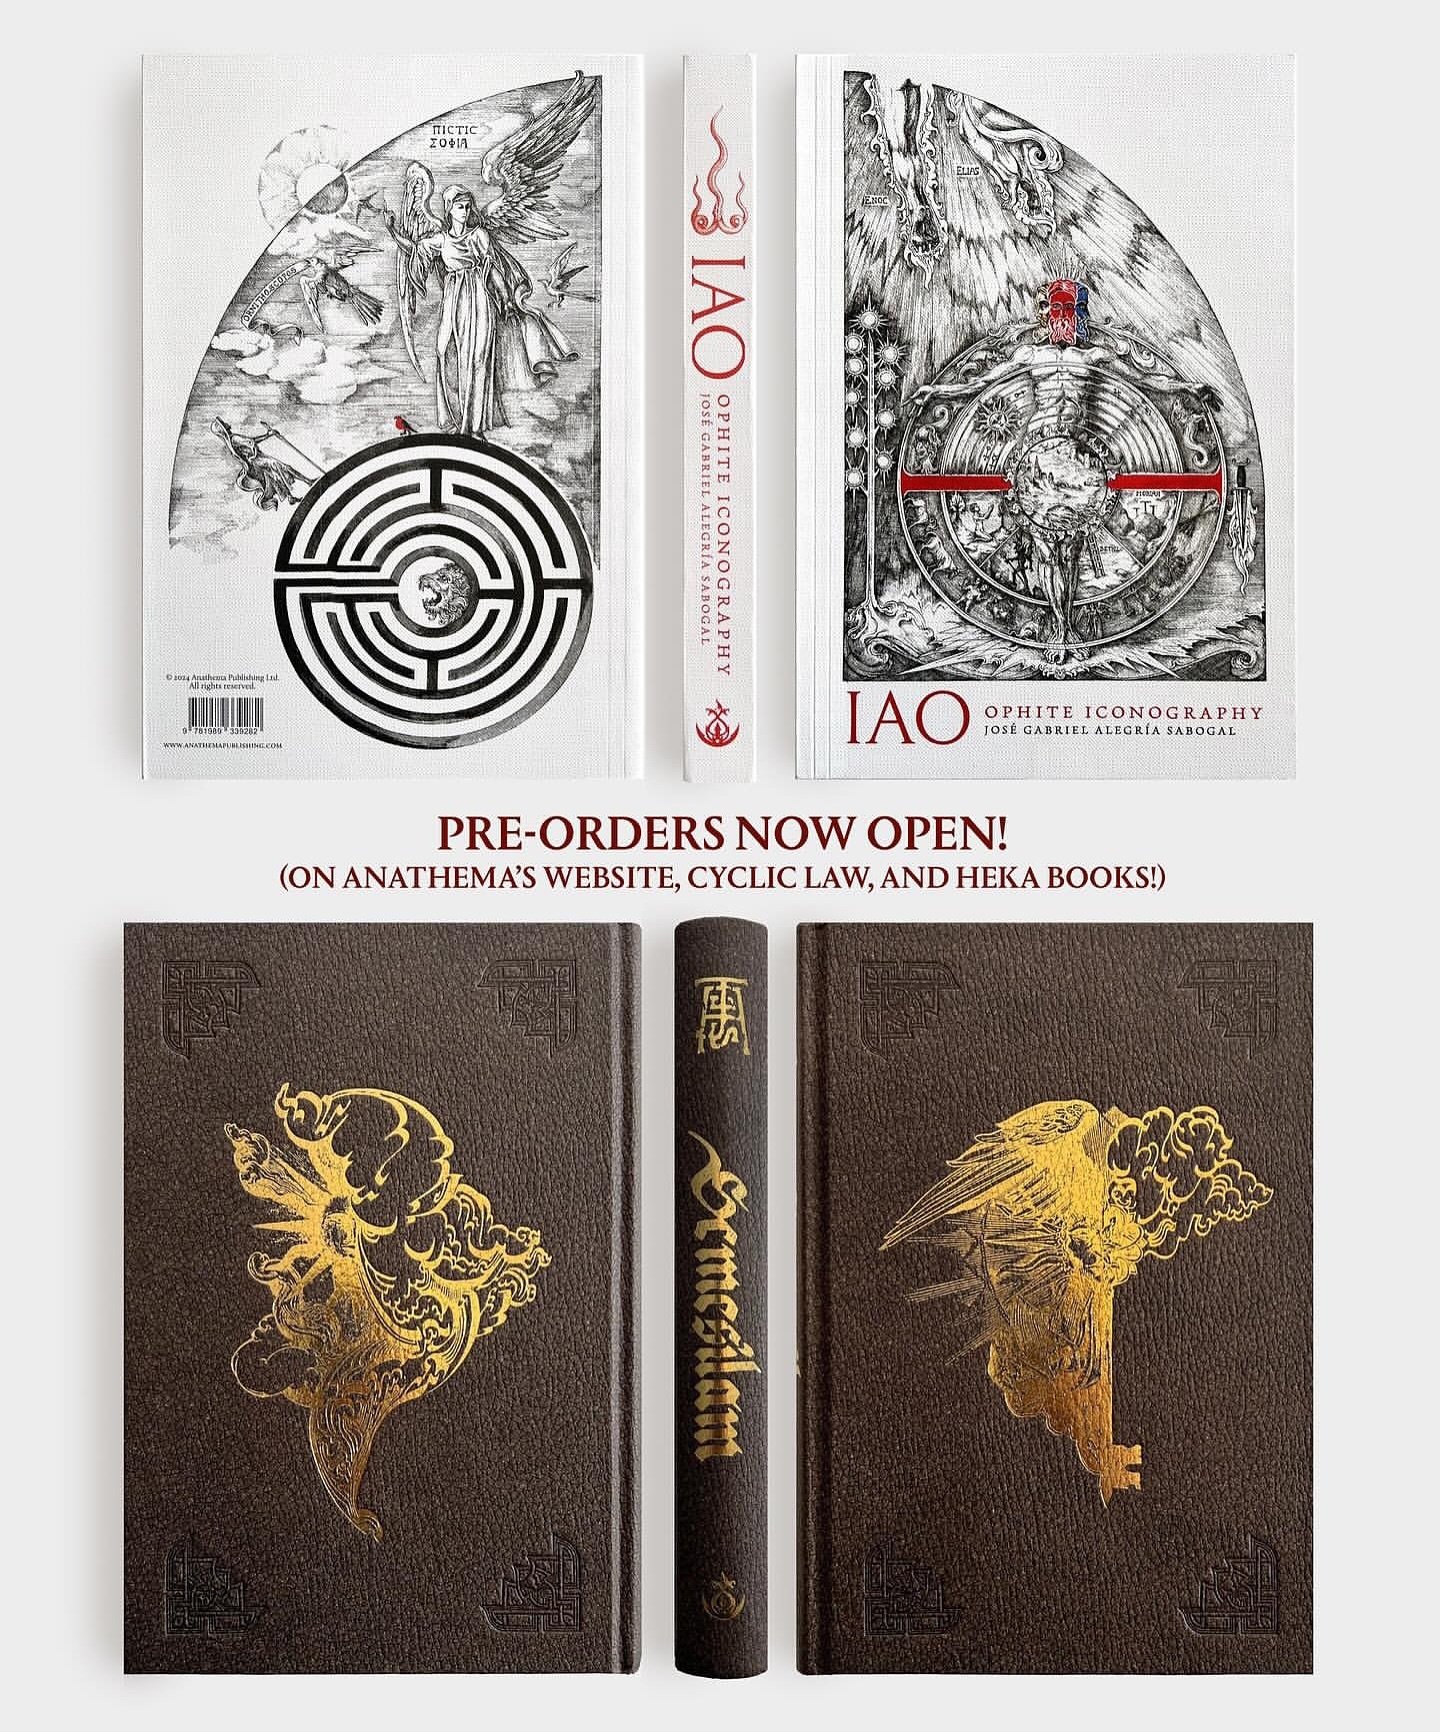 &lsquo;REGULAR&rsquo; PRE-ORDERS NOW OPEN!

Semesilam: The Eternal Sun [New Hardcover Editions]
&amp;
IAO: Ophite Iconography [Deluxe Softcover Reissue]
by
Jose Gabriel Alegría Sabogal @josegabrielalegriasabogal 

Now available to purchase at regula